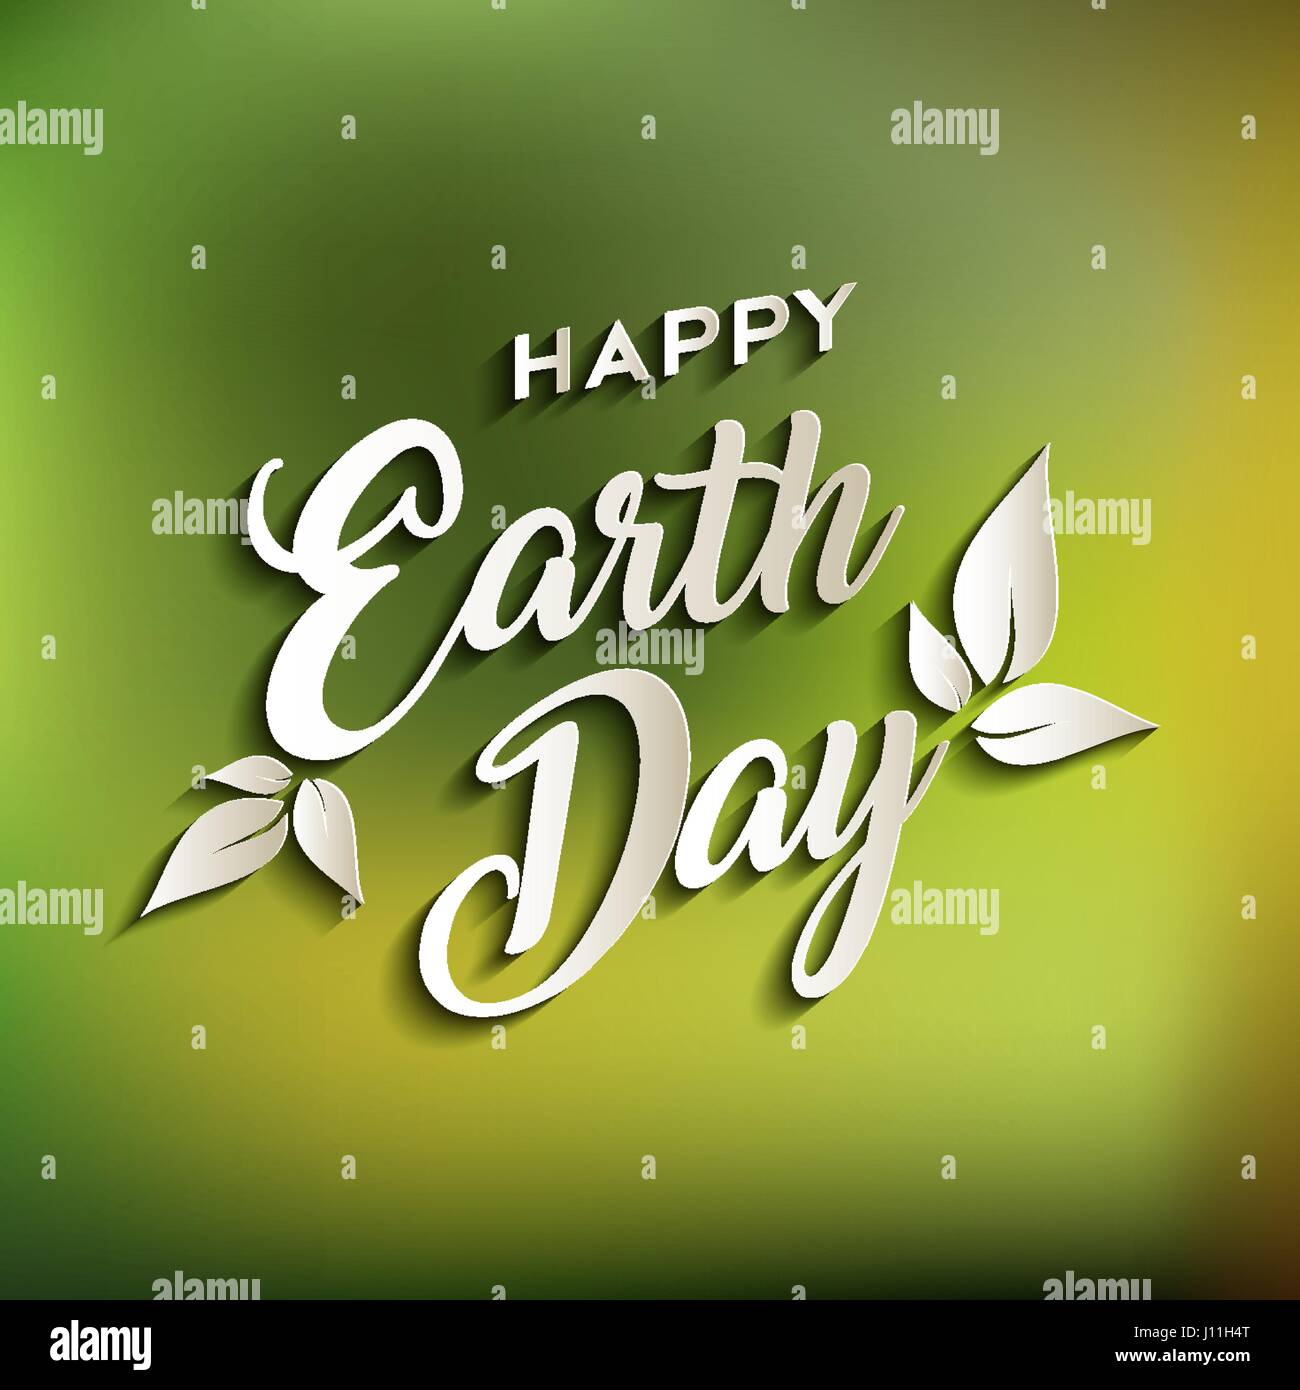 Happy earth day quote design for world environment care with green ...